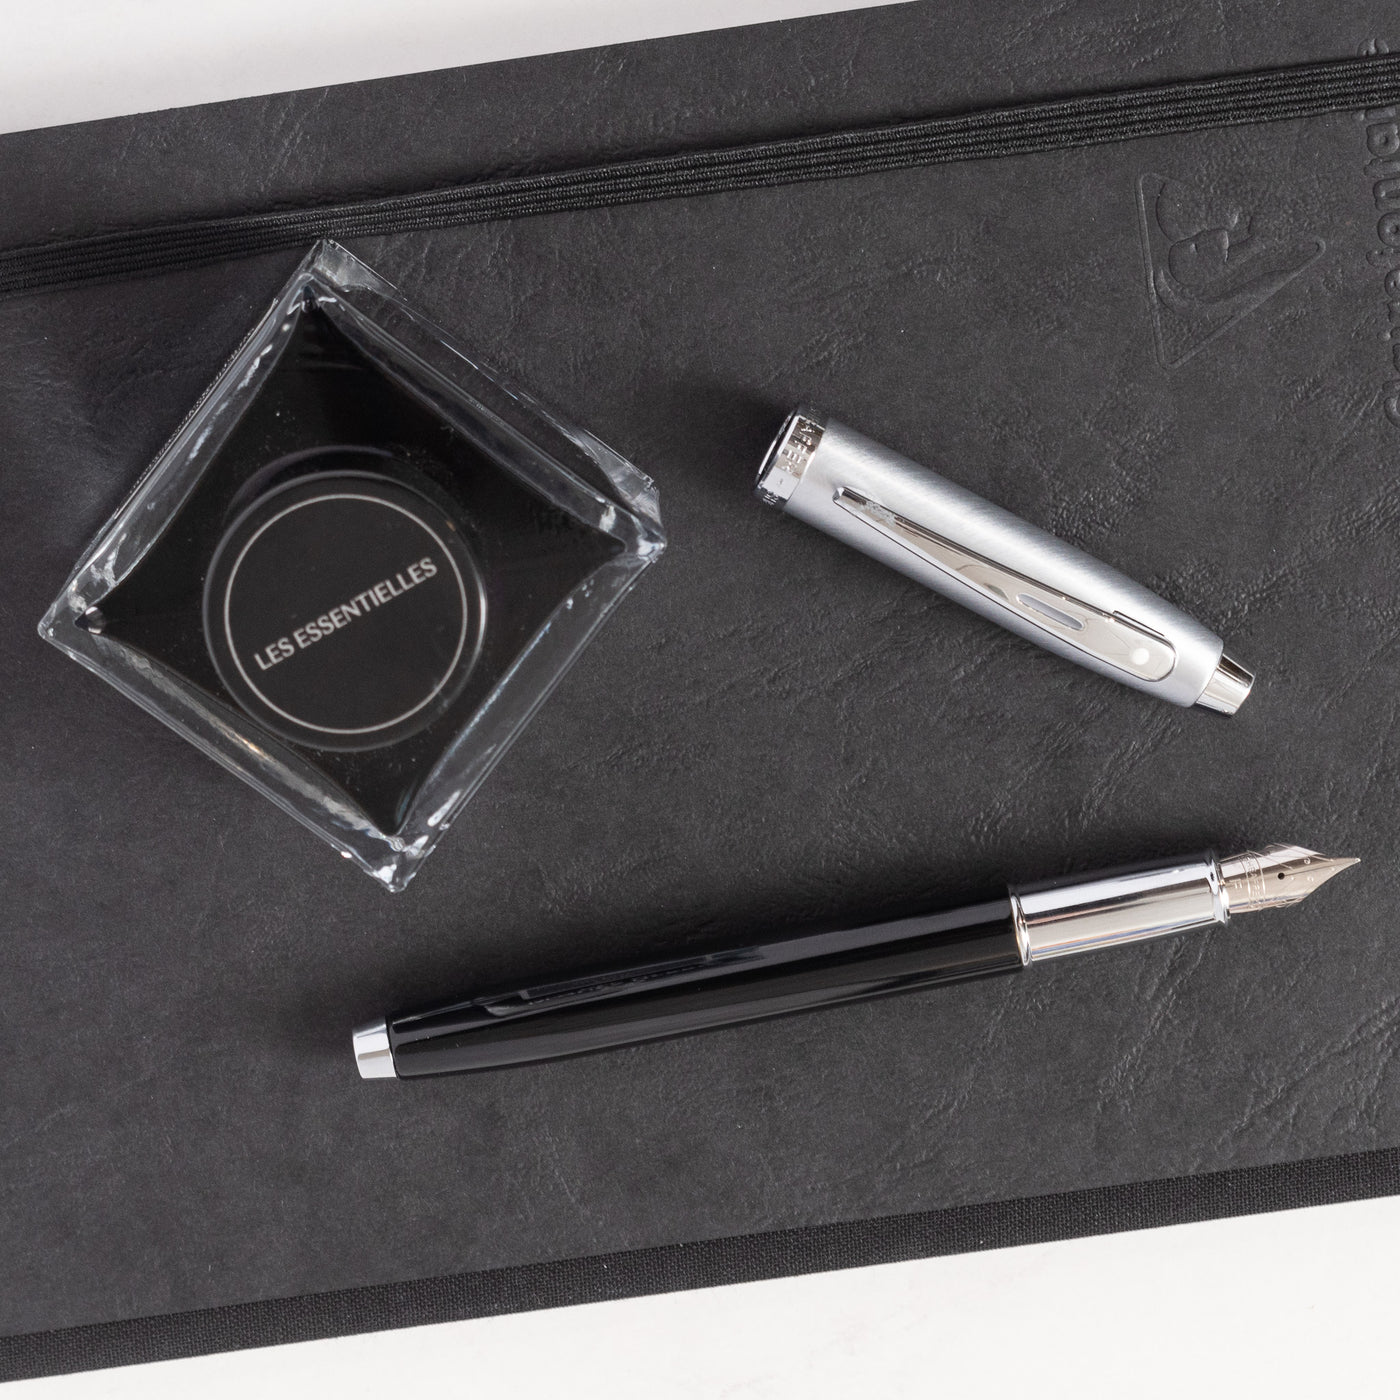 Sheaffer 100 Fountain Pen - Black with Brushed Chrome Cap metal